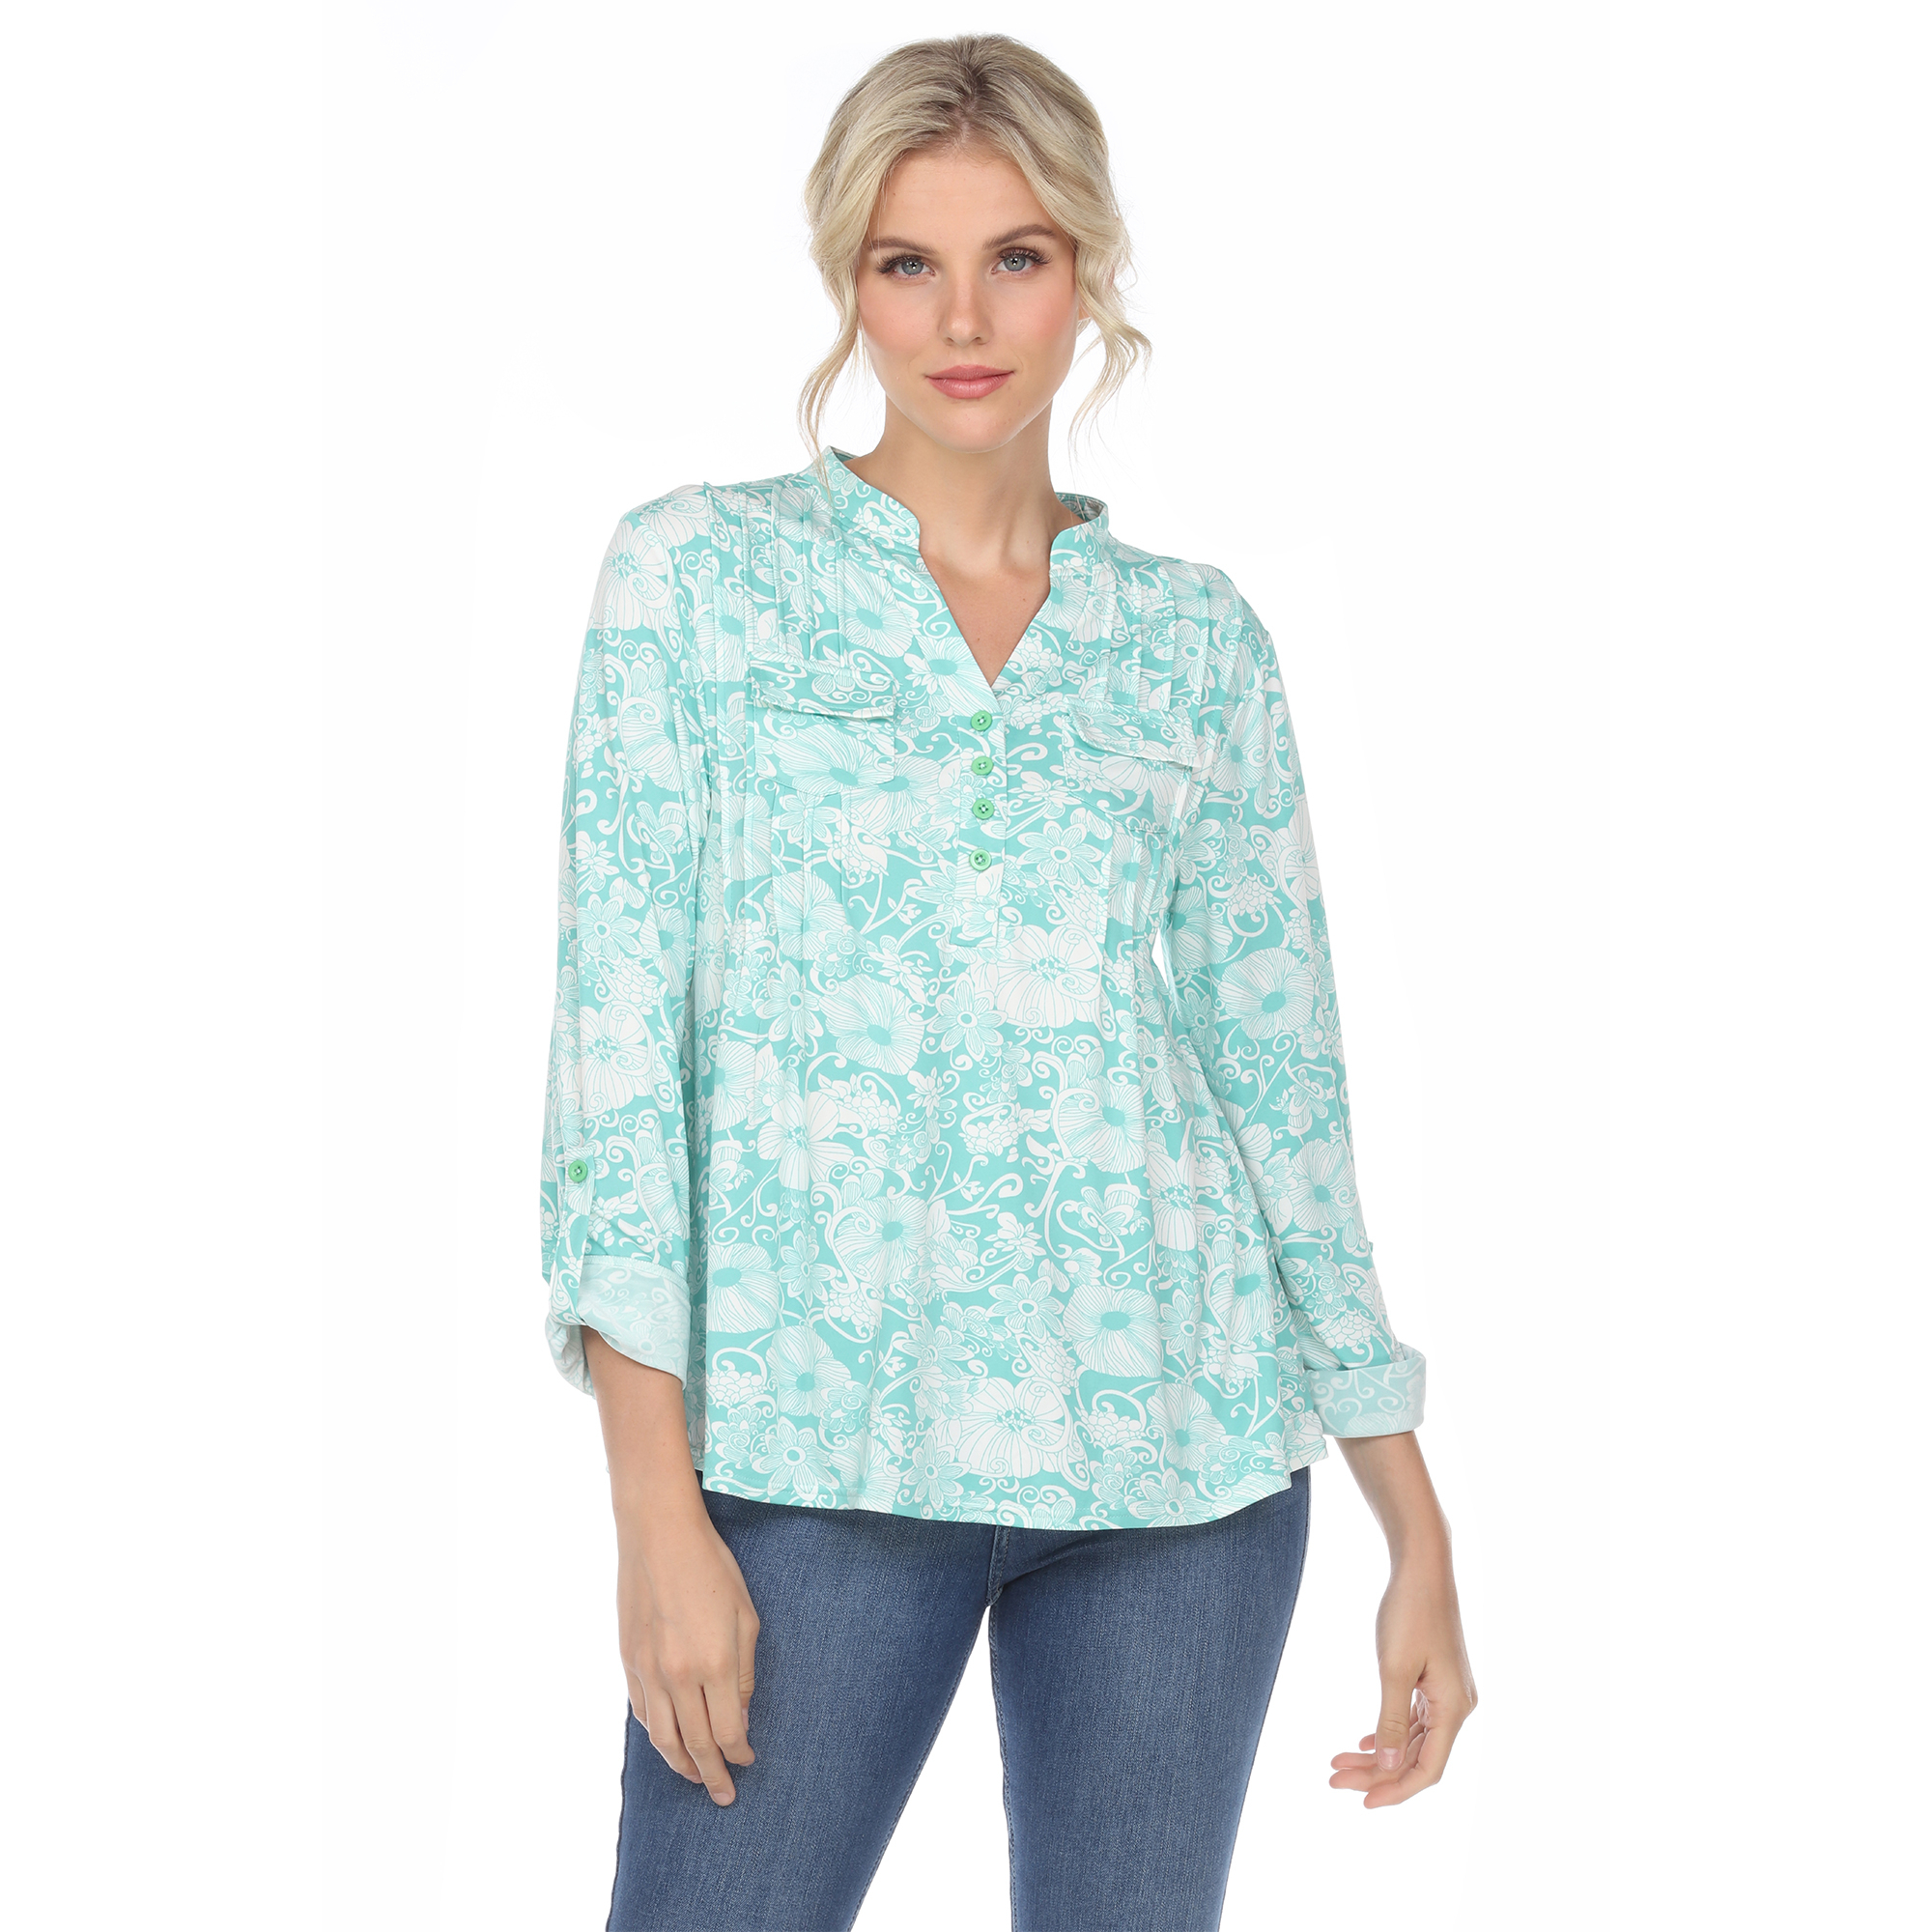 White Mark Women's Pleated Long Sleeve Floral Print Blouse - Mint, 4X